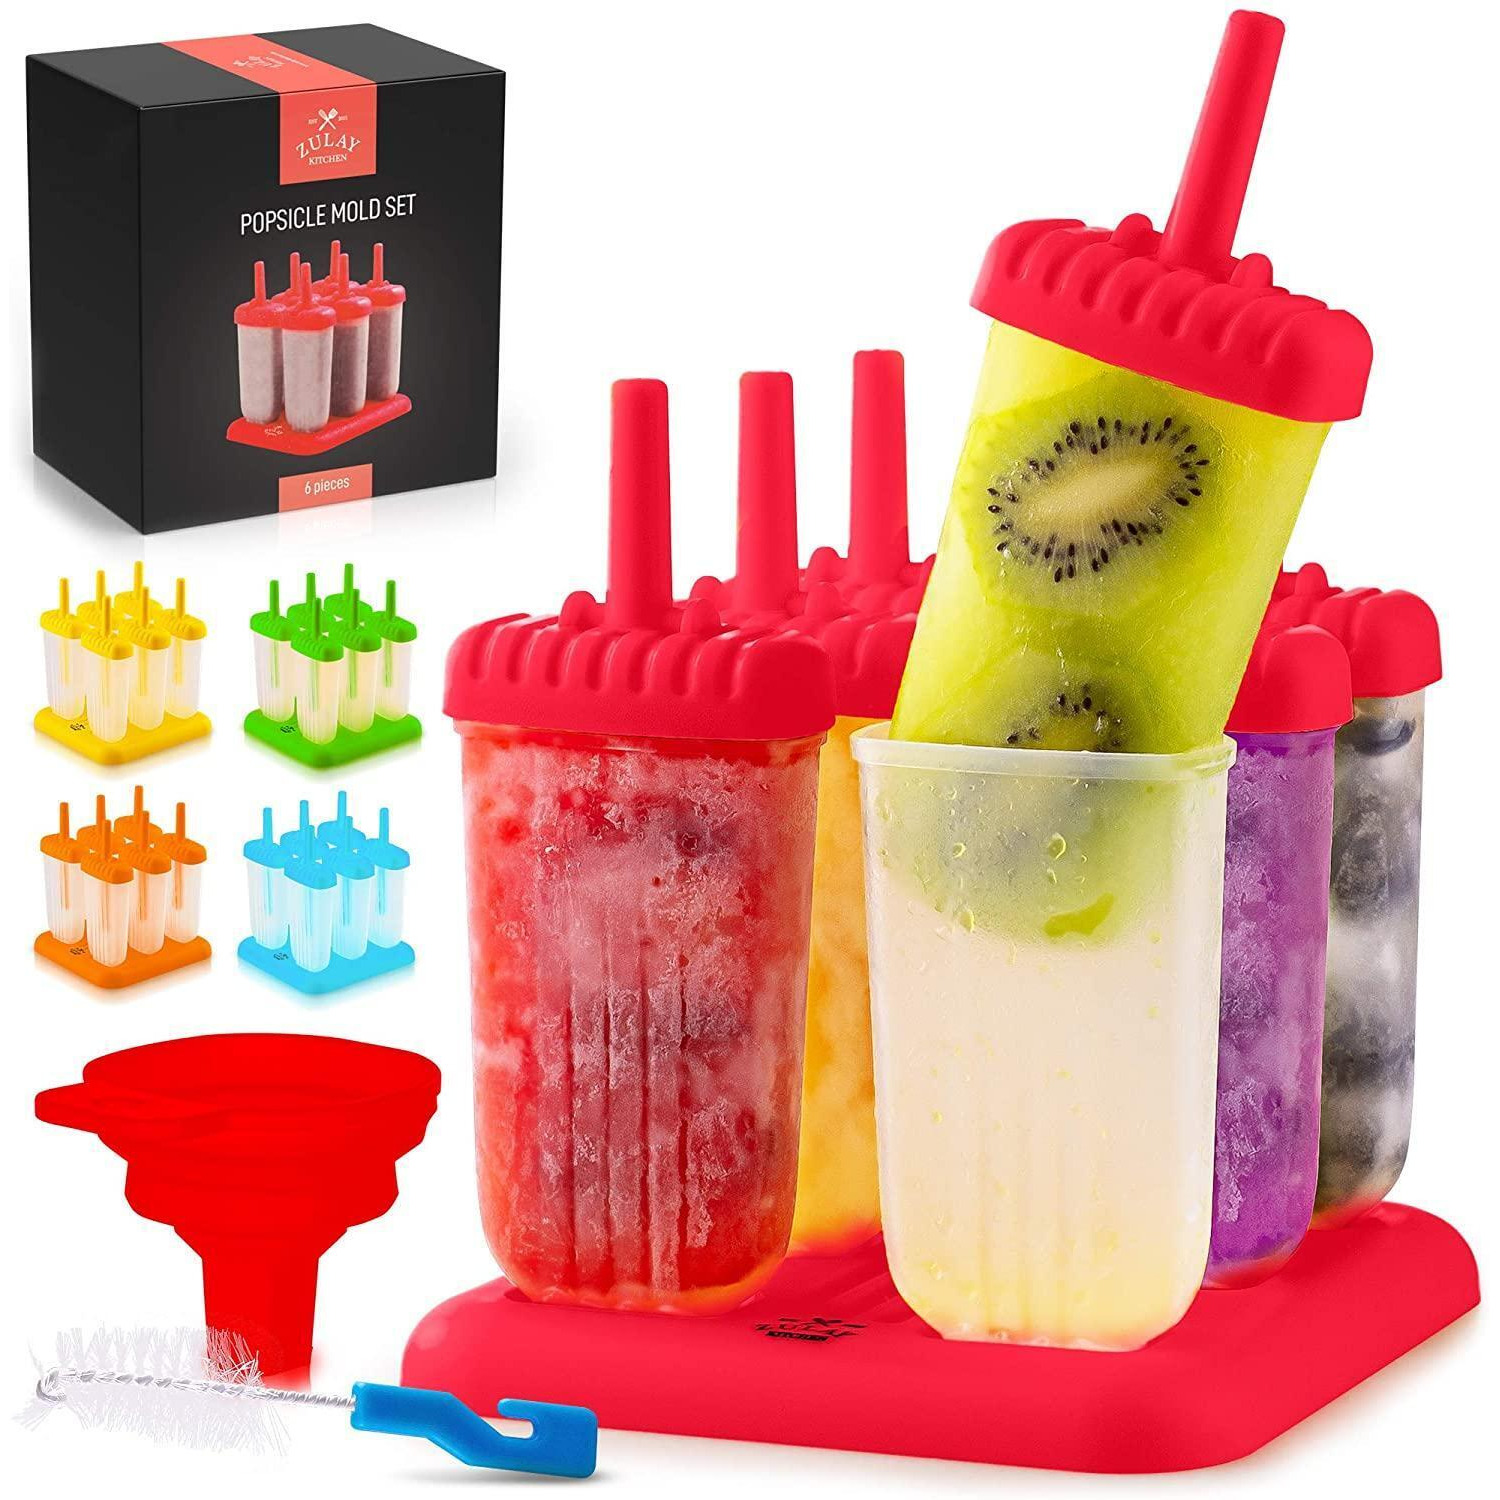 Zulay Kitchen Popsicle Molds Set of 6 - BPA Free Reusable Molds With Drip Guard, Tray, Silicone Funnel & Cleaning Brush alternate image